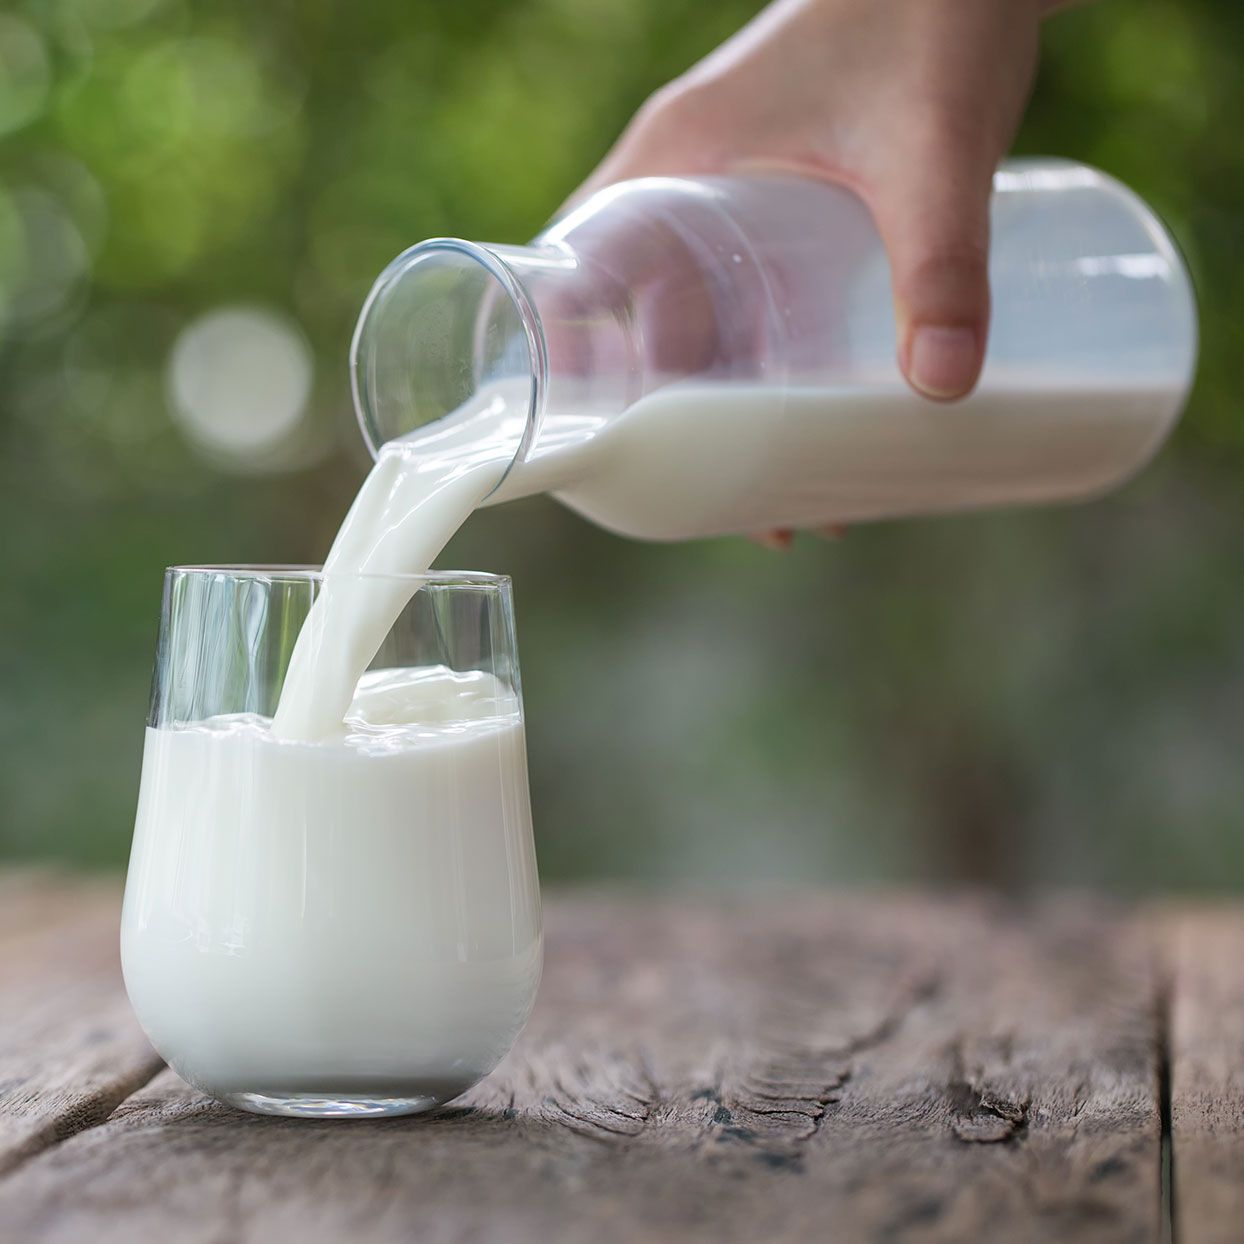 Someone pouring milk into a glass from a glass milk jug